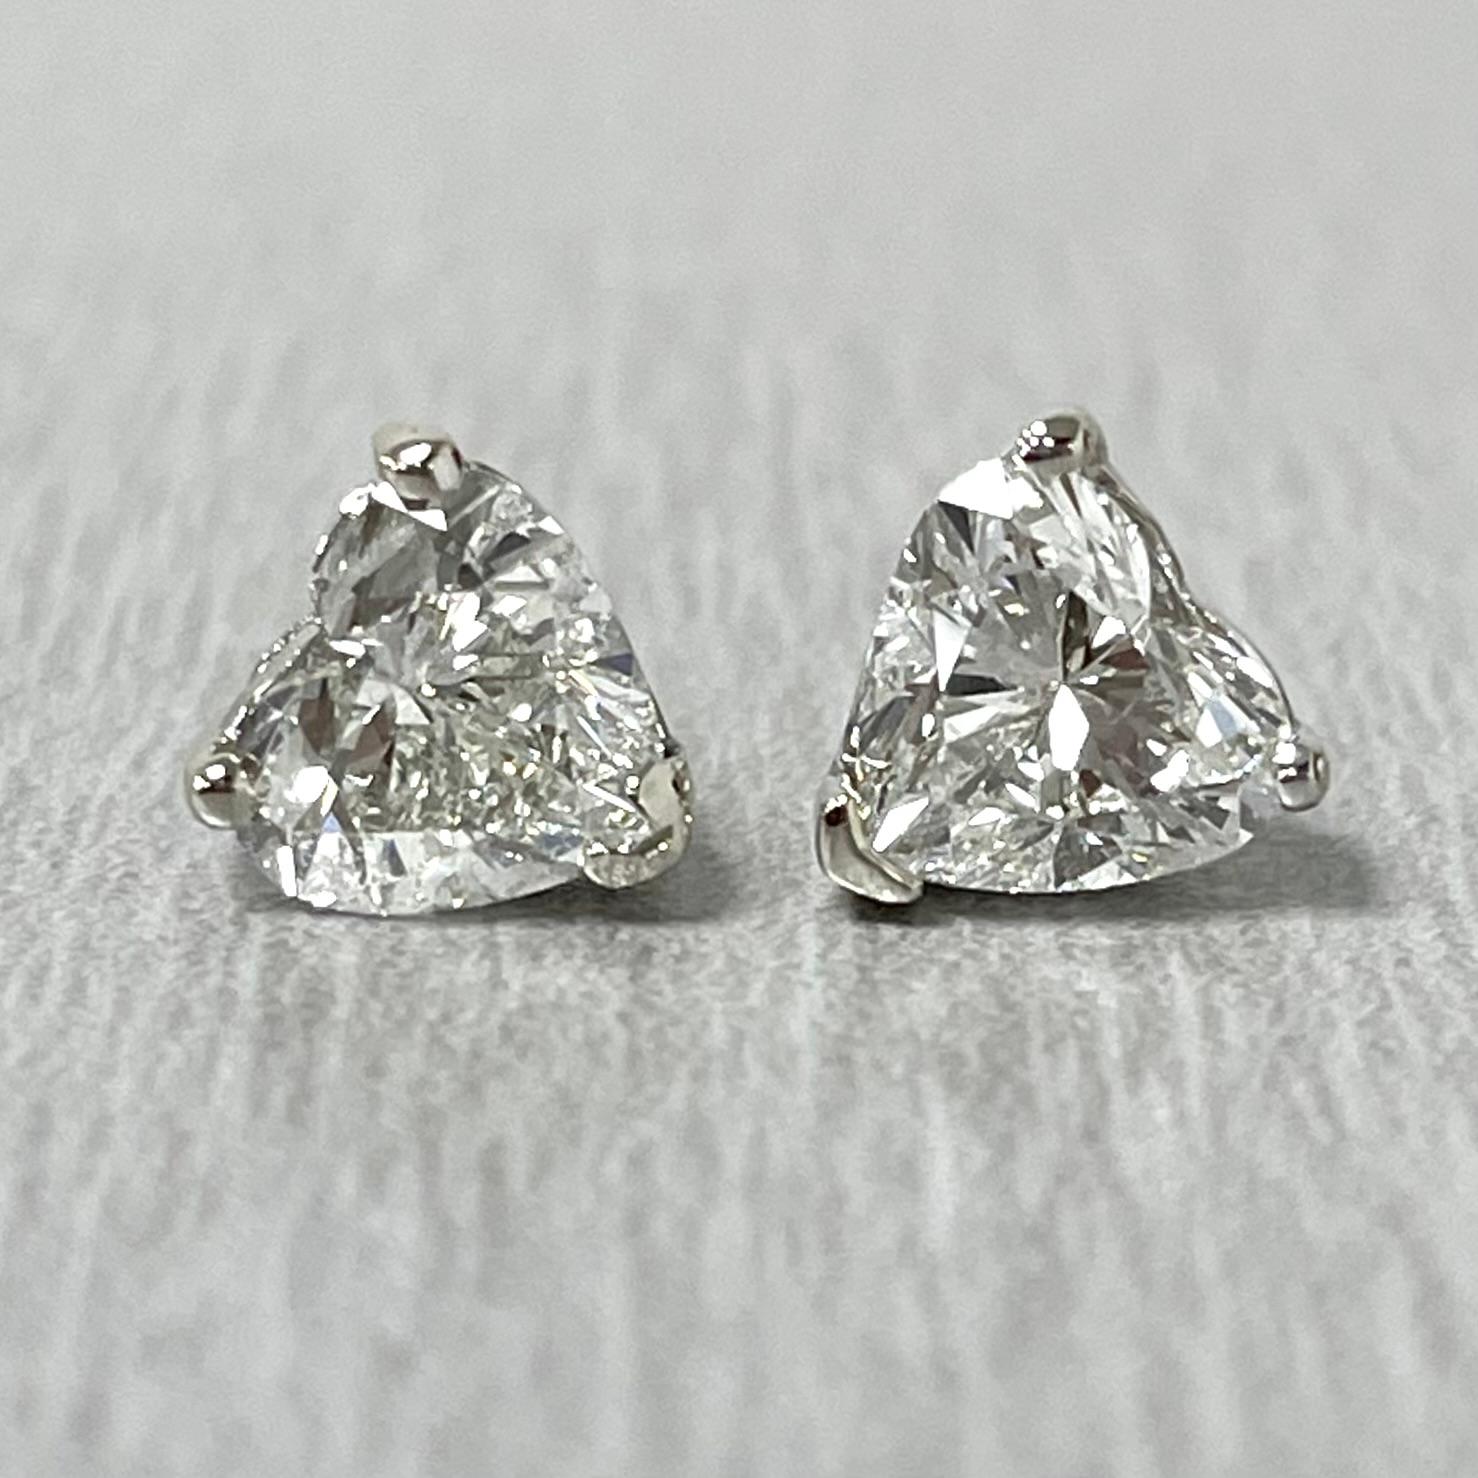 Contemporary Beauvince Heart Shape Solitaire Studs '2.01 Ct I SI1 GIA Diamonds' in White Gold